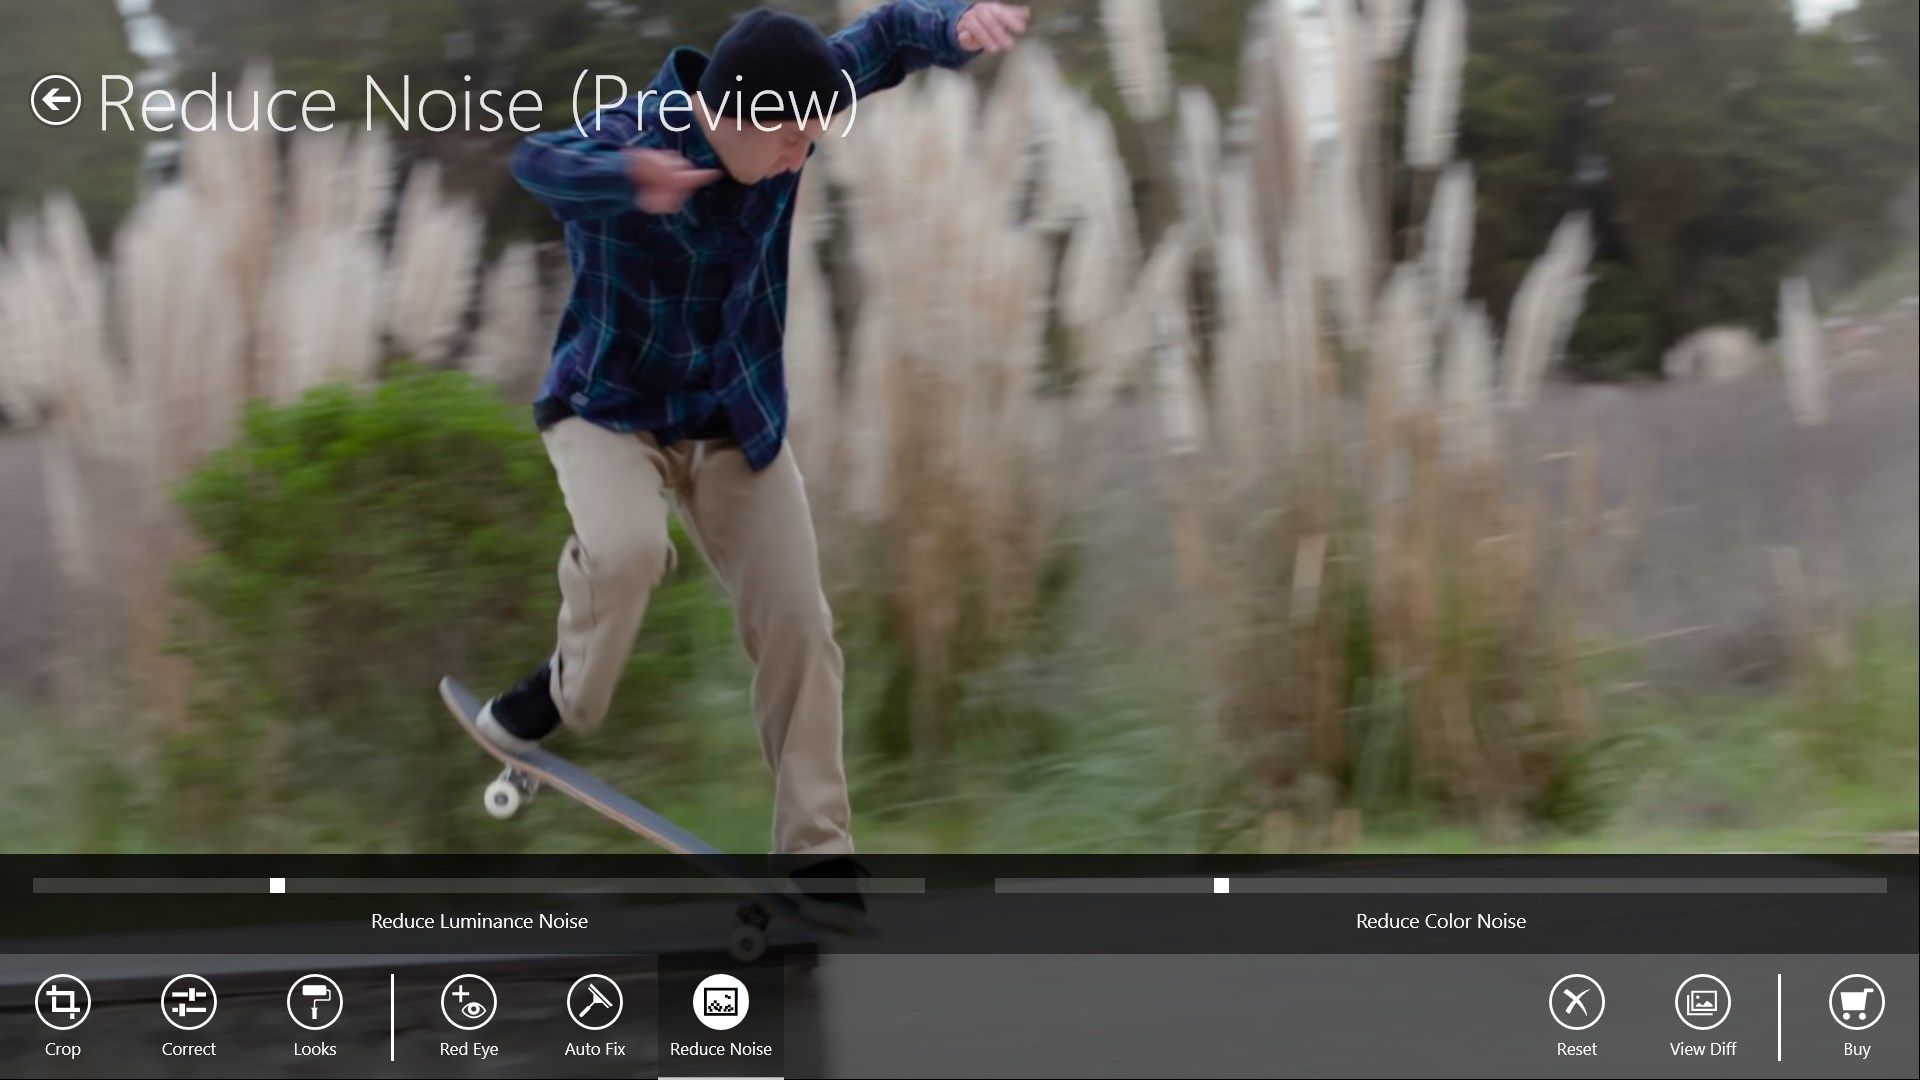 Use slider controls to Reduce Noise and for fine control over corrections like contrast, exposure, and white balance.